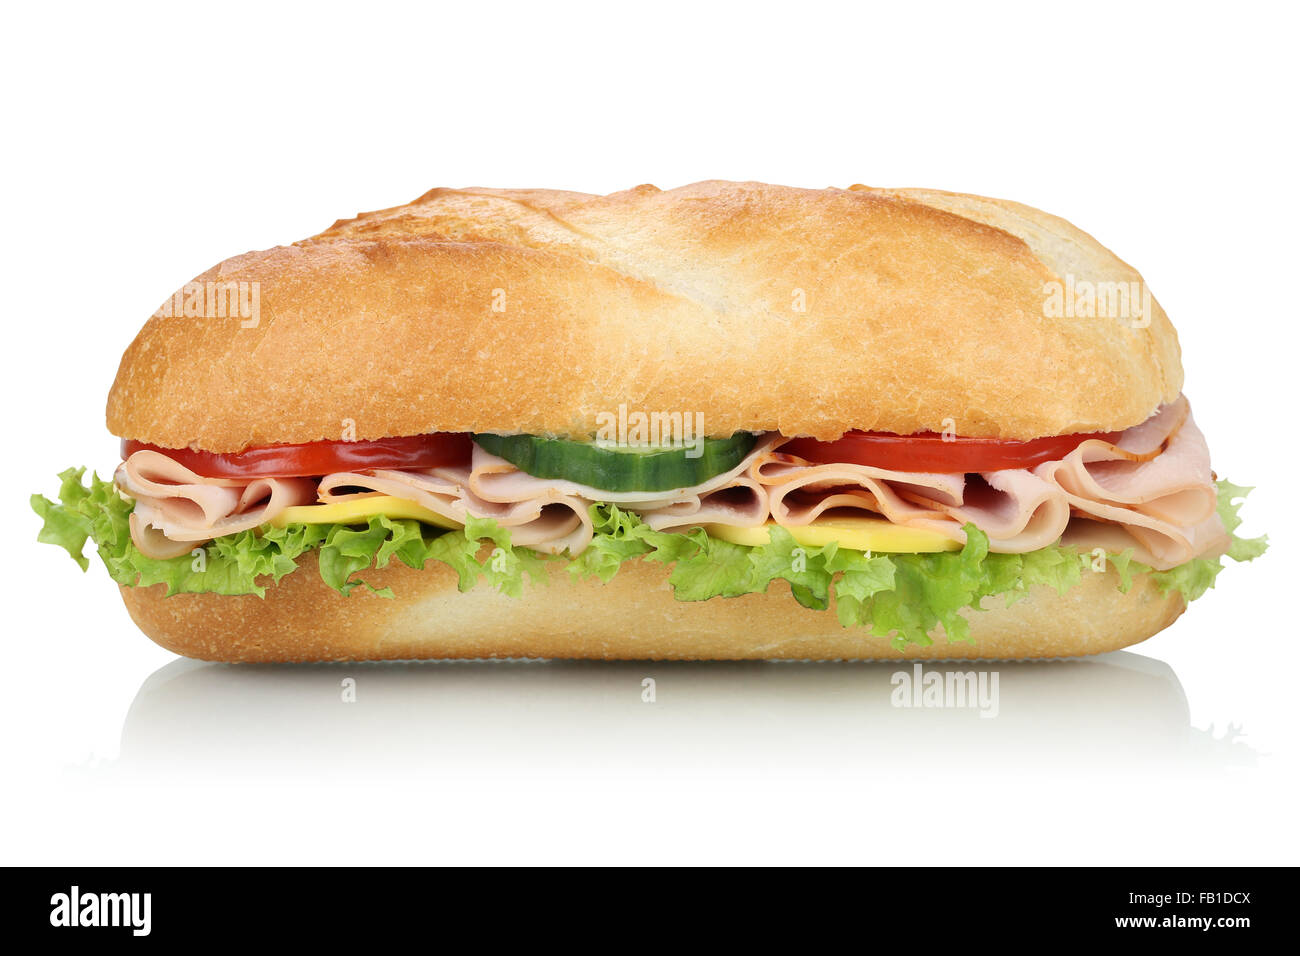 Sub deli sandwich baguette with ham, cheese, tomatoes and lettuce side view isolated on a white background Stock Photo